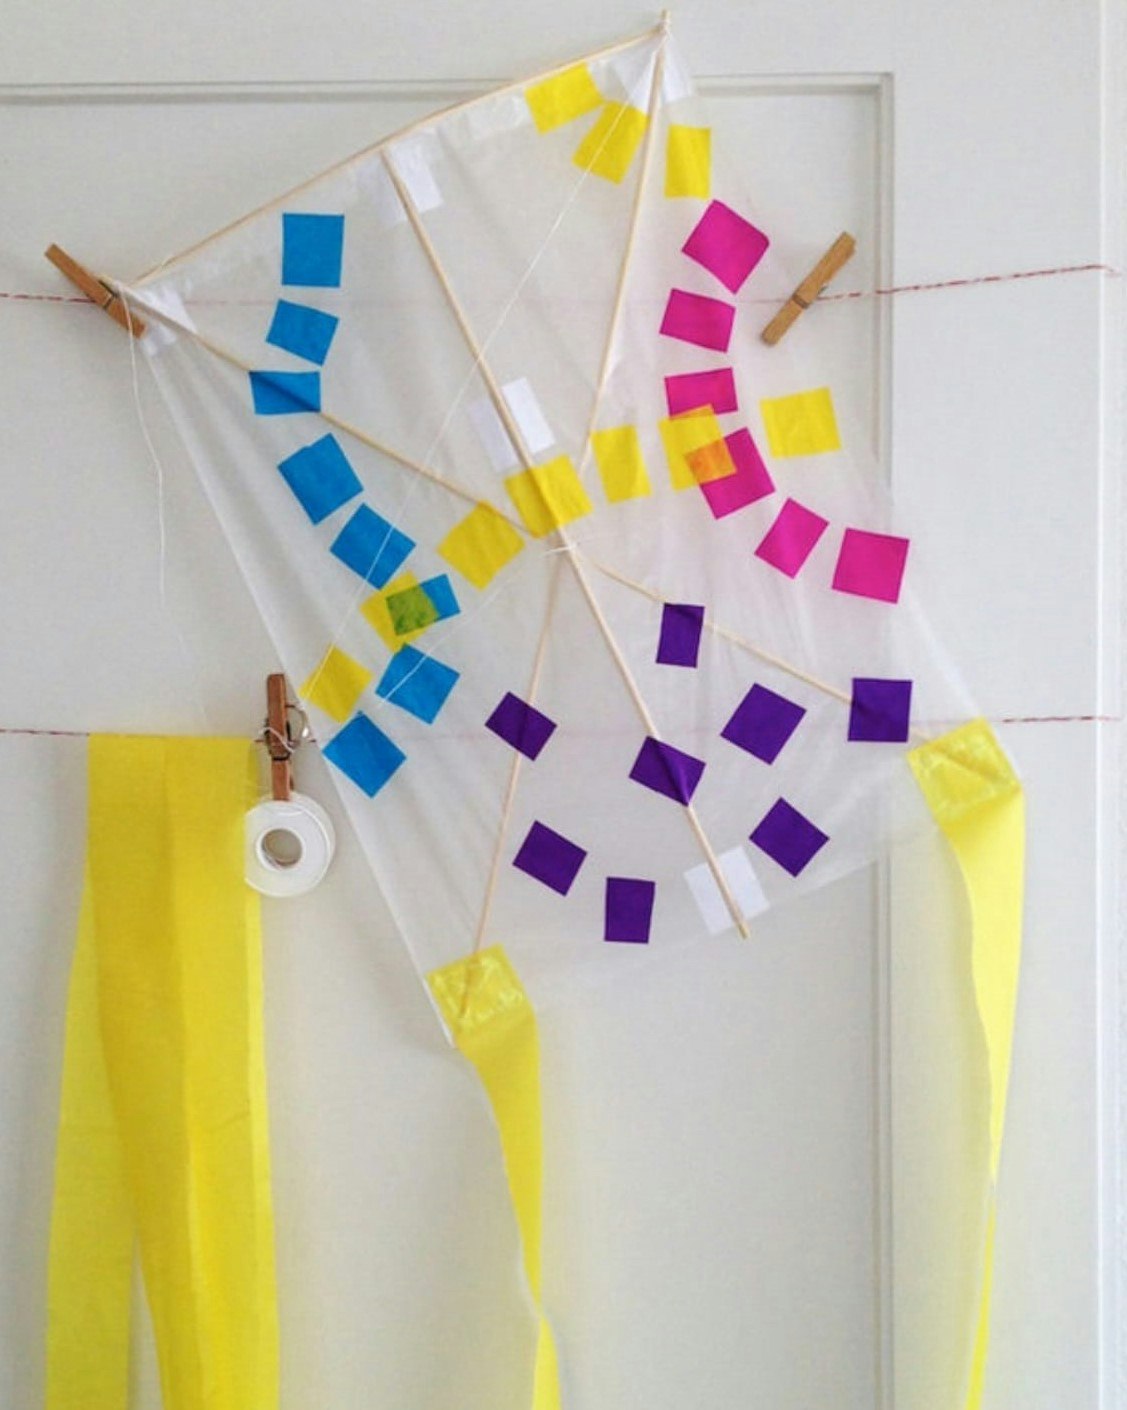 A paper kite hangs on a white doorframe. The kite is white with small blue, yellow, pink and purple blocks. Yellow ribbon hangs from the bottom of the flag.